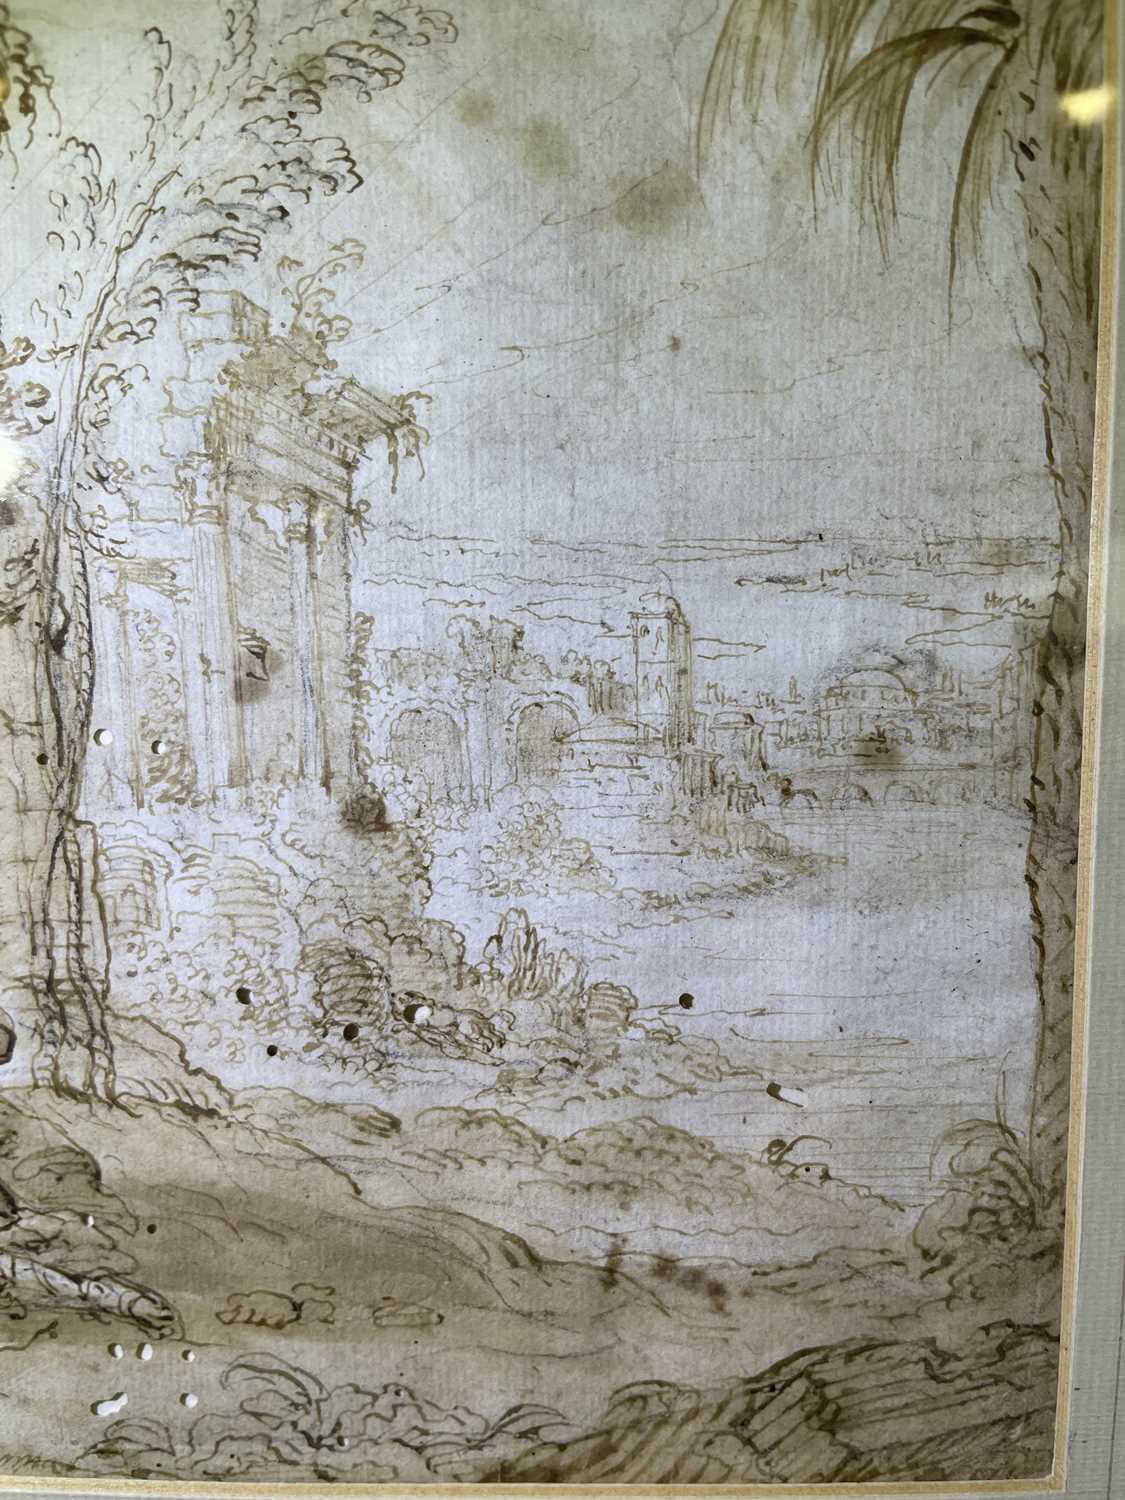 M *Arasser (17th/18th Century) Pyramus and Thisbe Signed and inscribed "Roma", brown ink and pencil, - Image 23 of 23